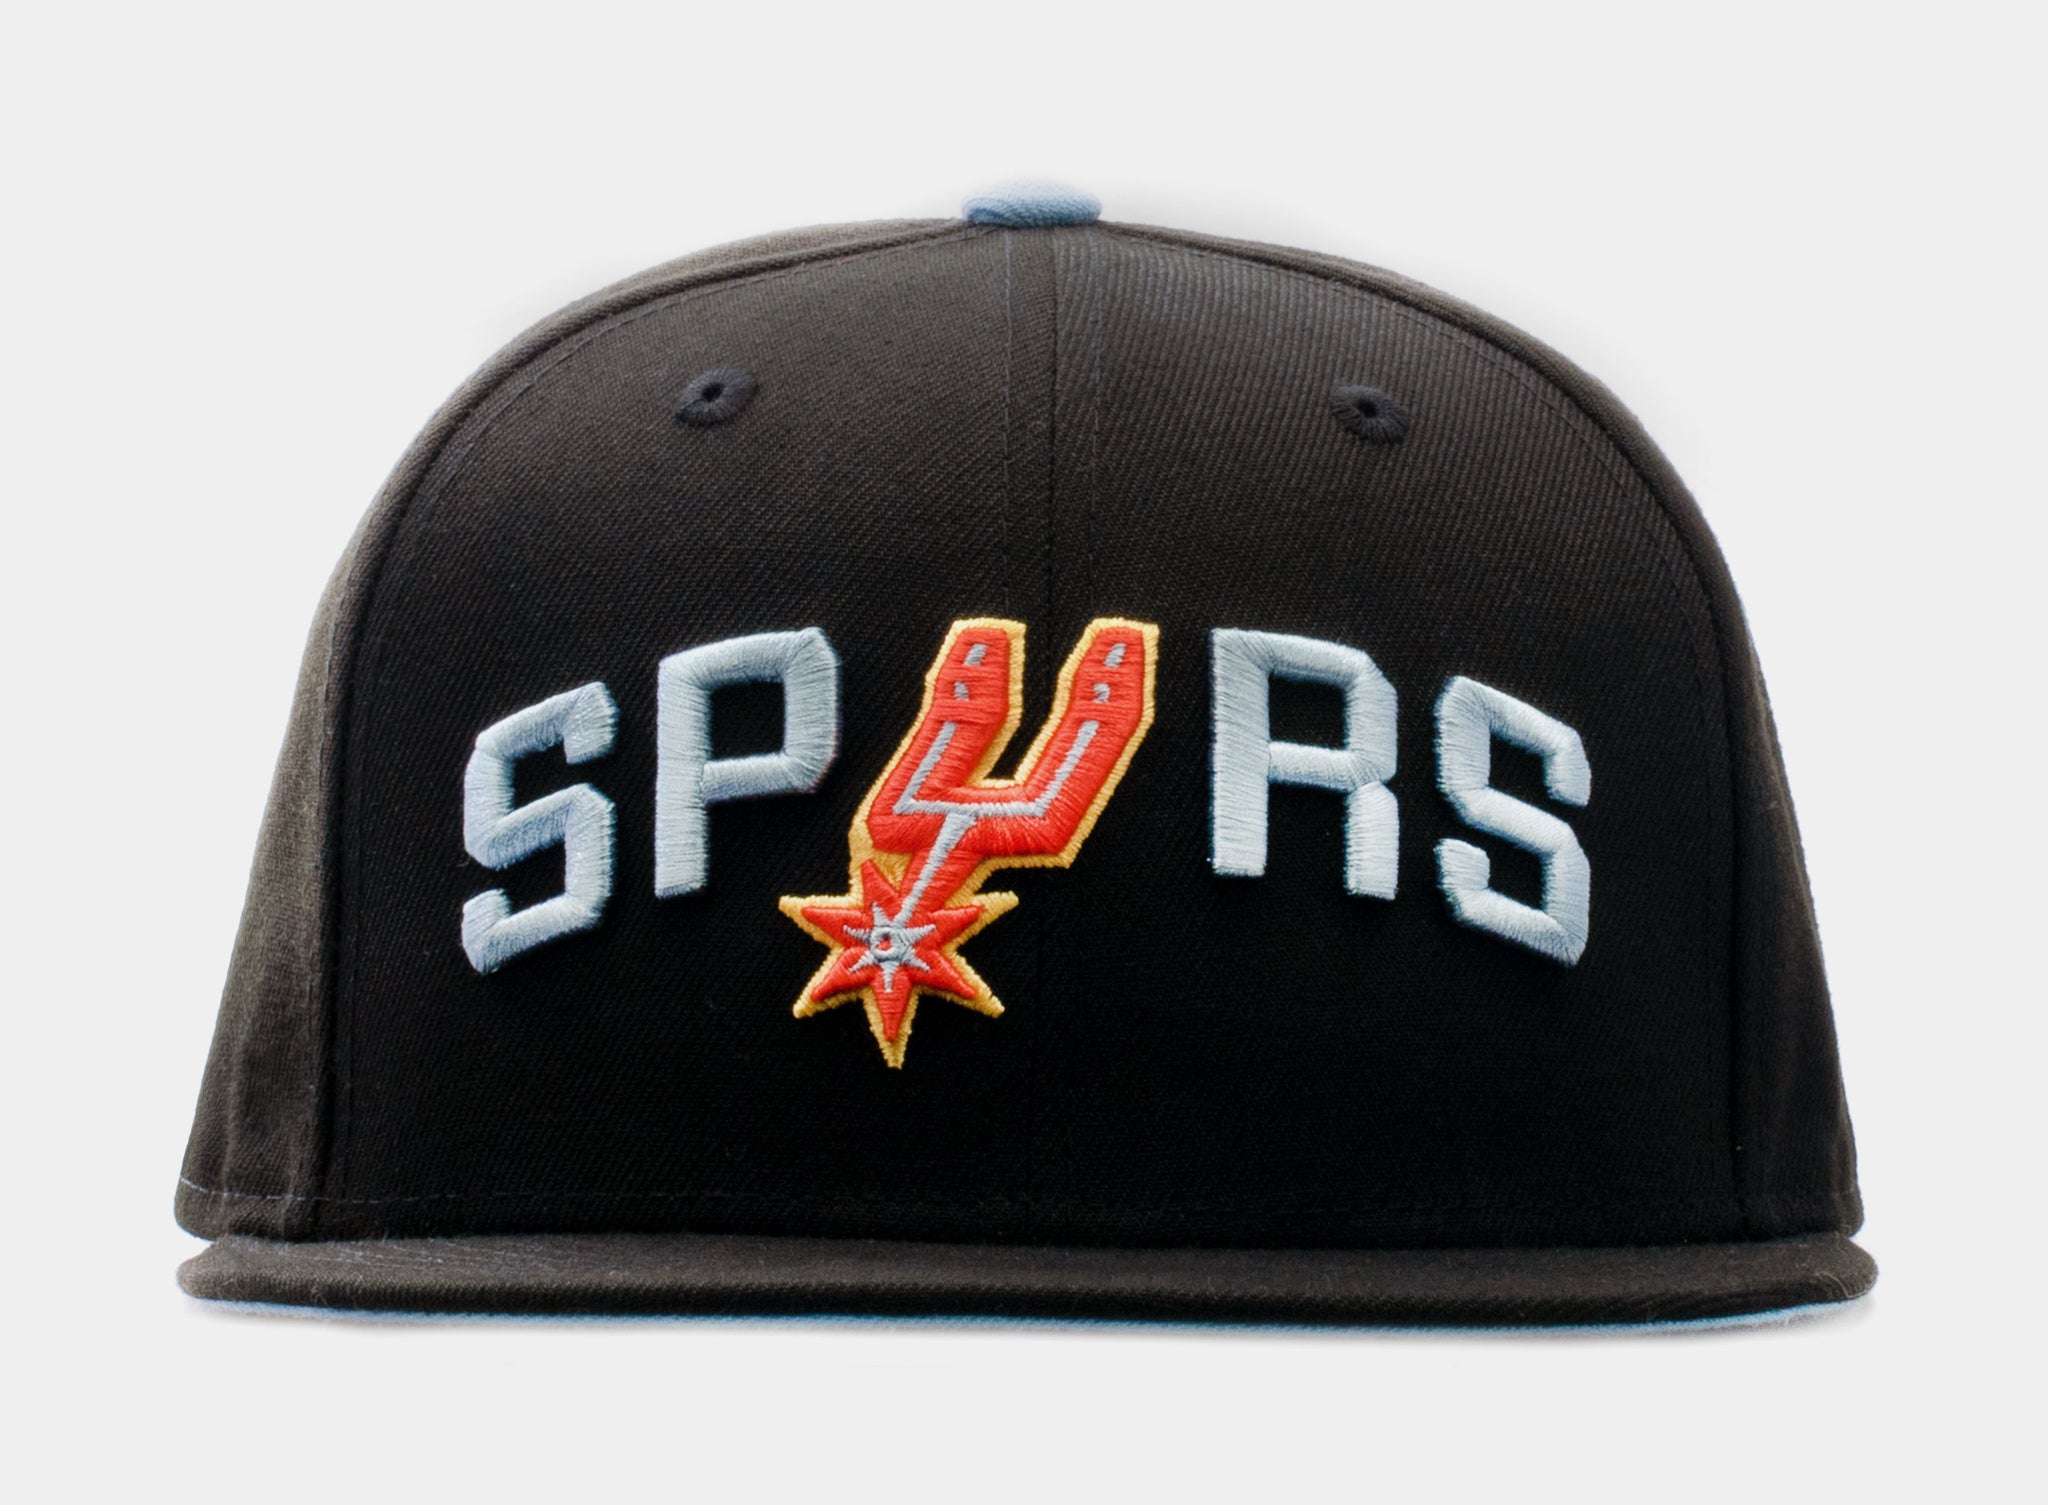 Men's New Era Gray/Black San Antonio Spurs Two-Tone 59FIFTY Fitted Hat